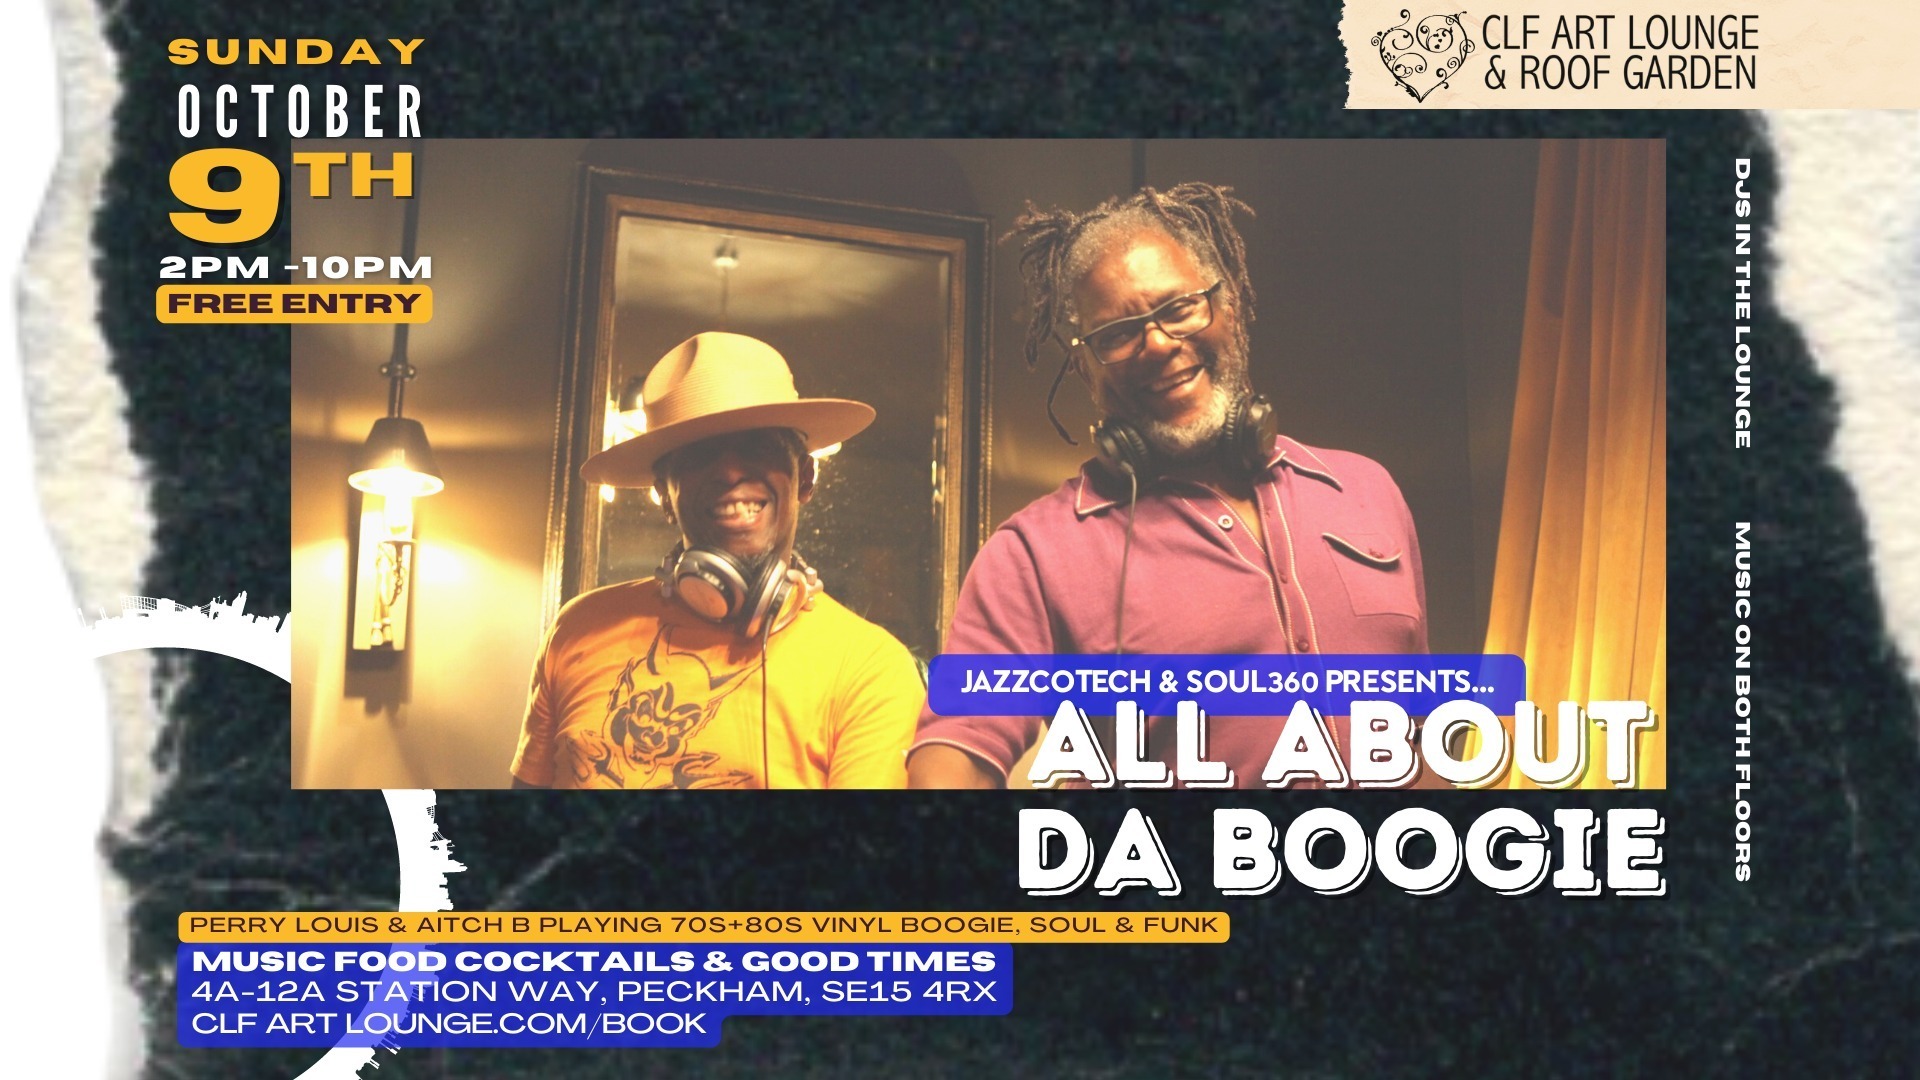 ALL ABOUT DA BOOGIE – Feat. DJs PERRY LOUIS AND AITCH B, London, United Kingdom